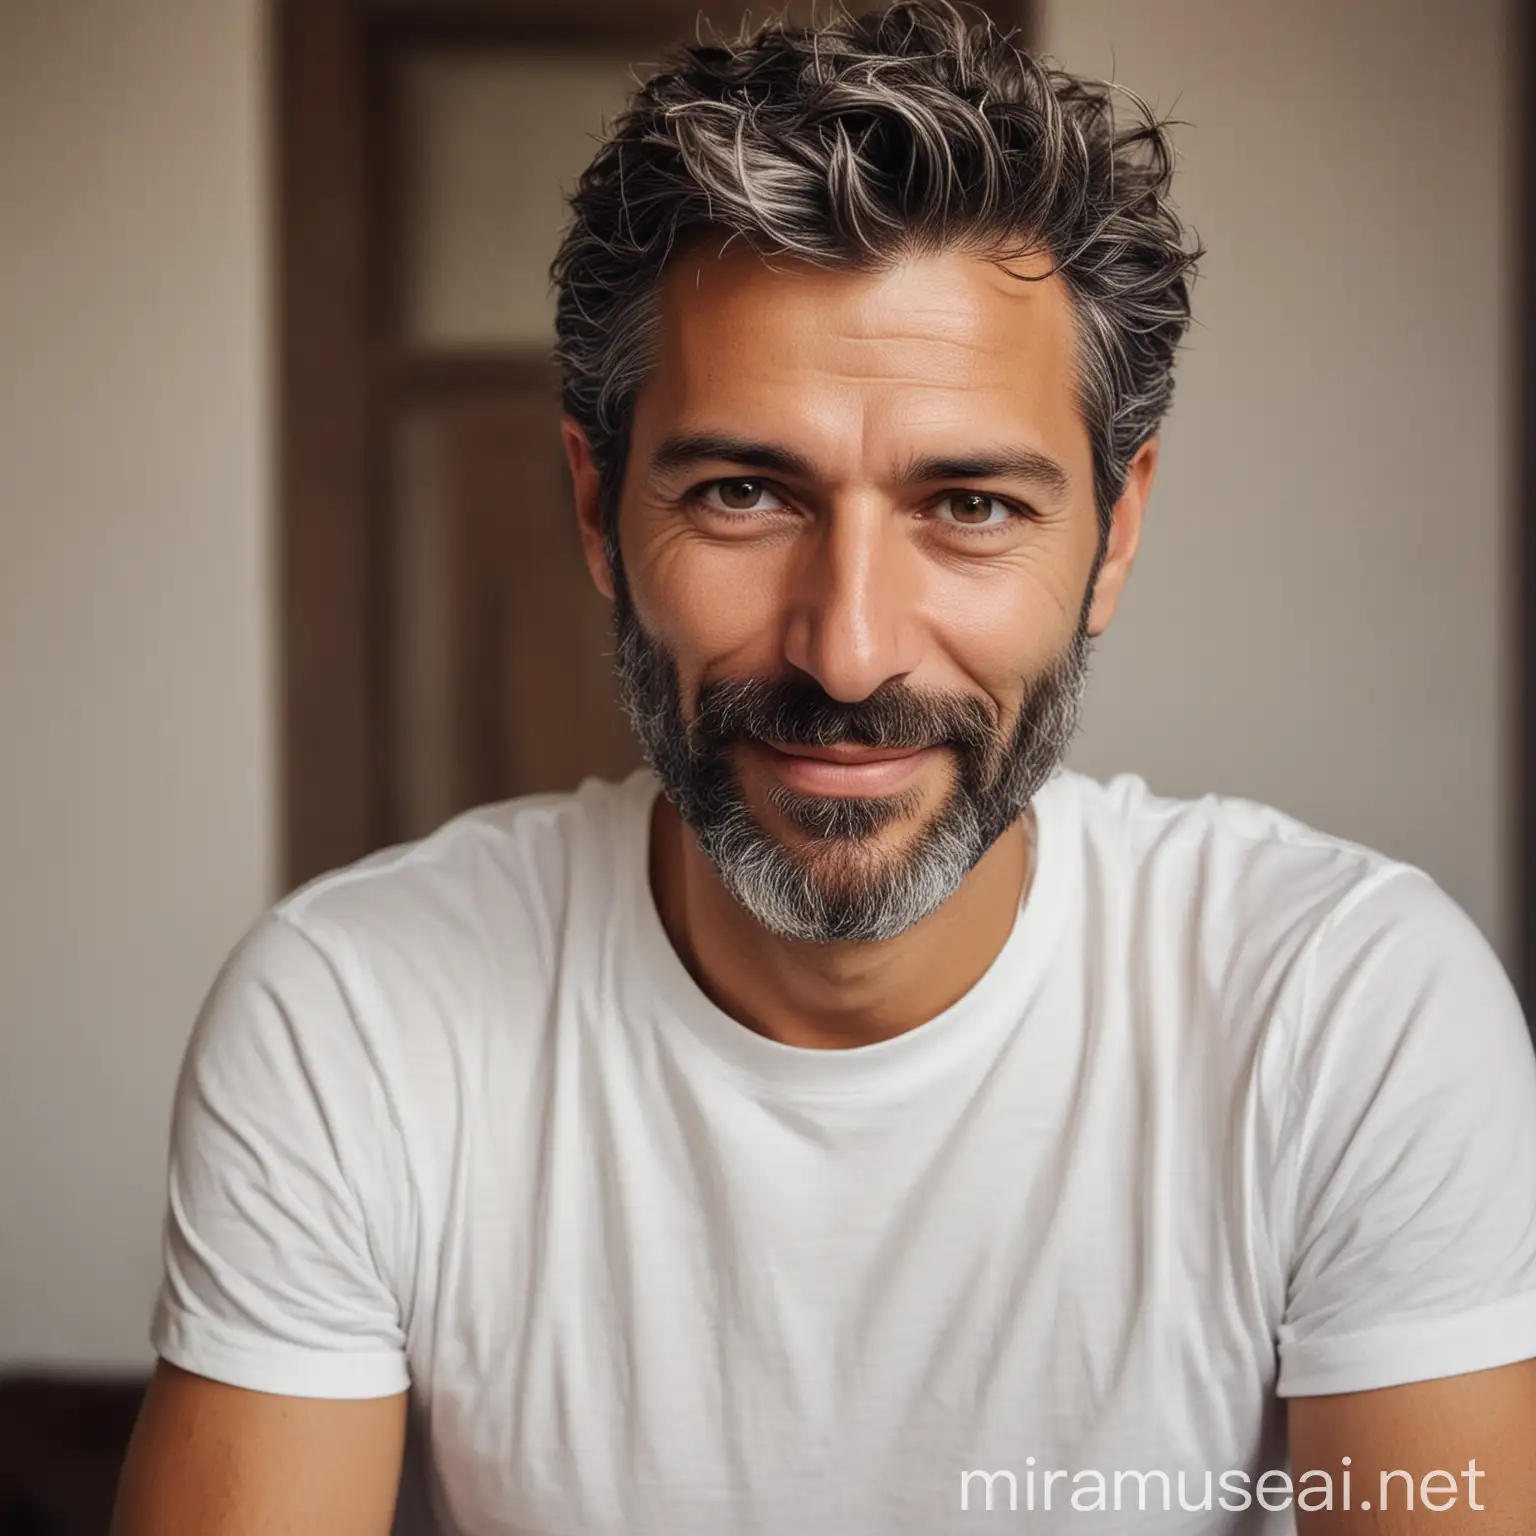 Italian Man with Salt and Pepper Hair and Beard Smiling in Summer Italian Apartment